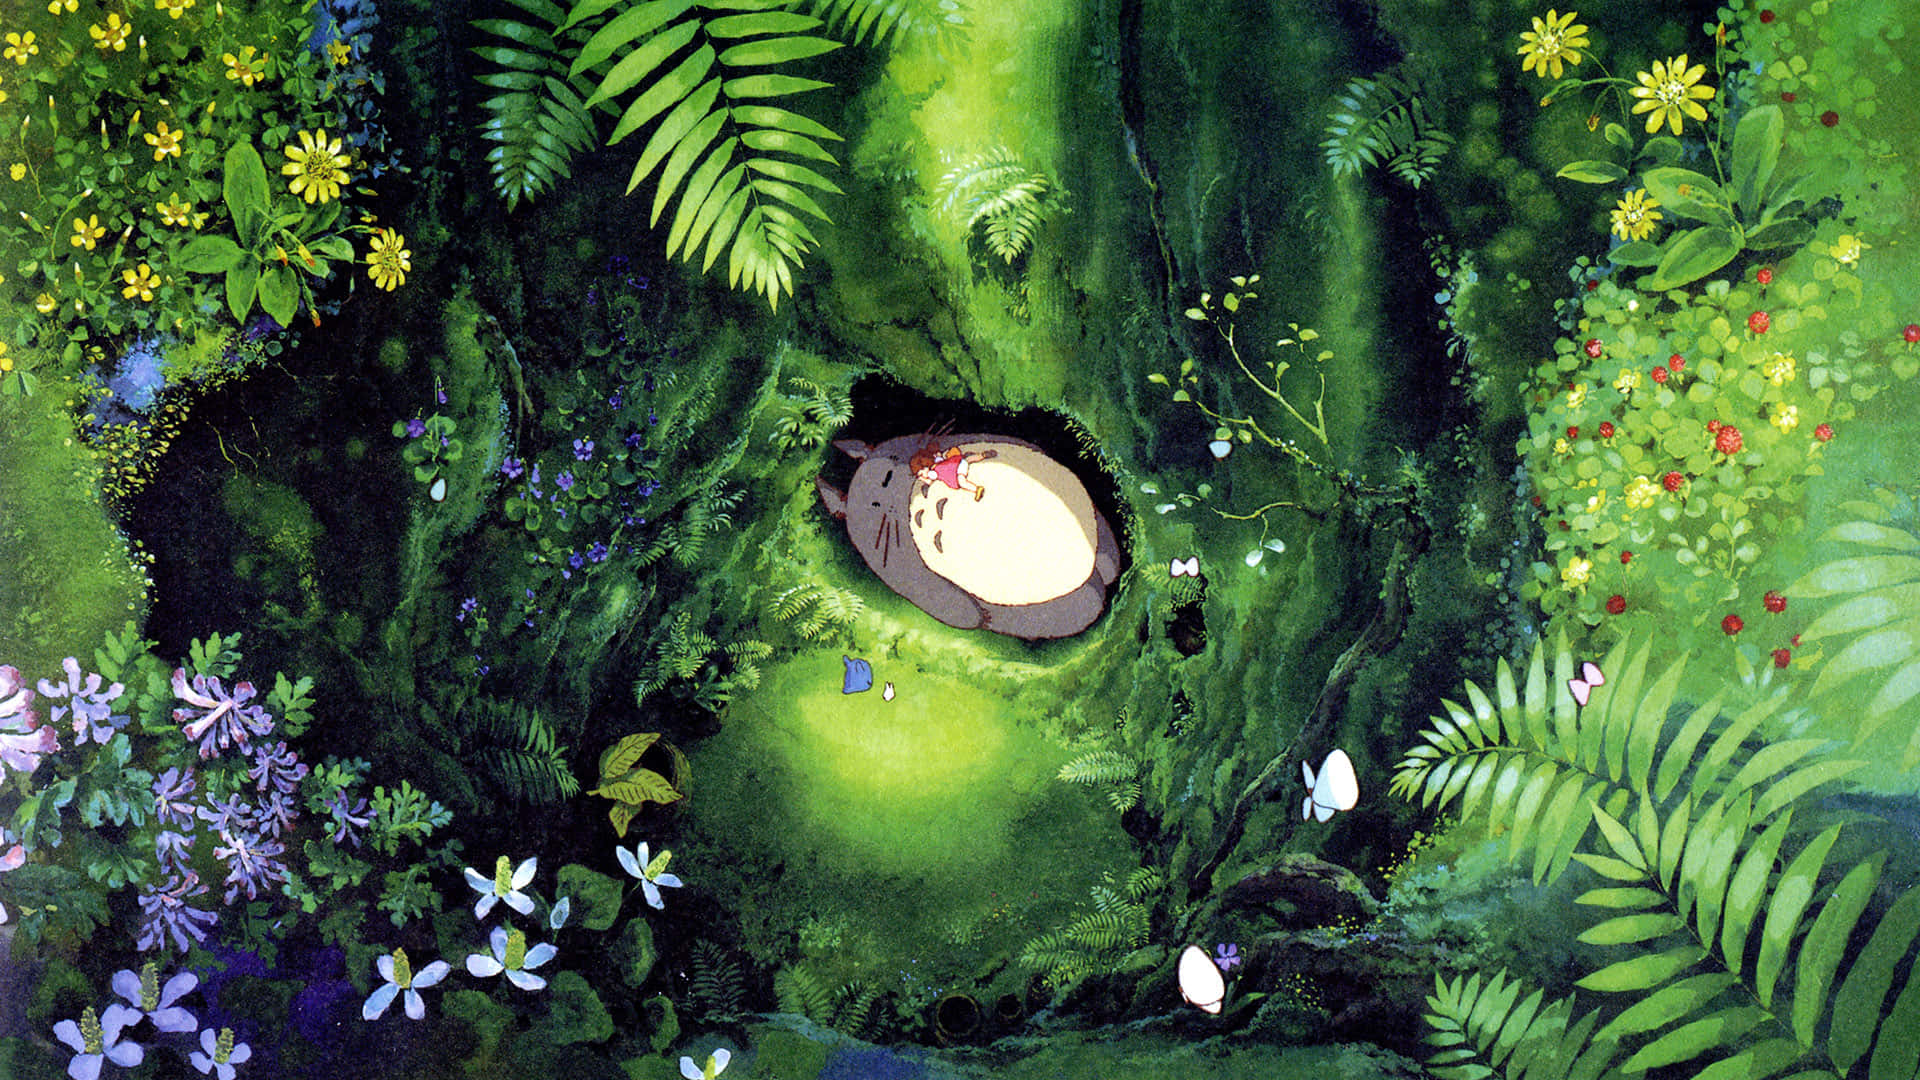 Take a Journey Through Nature with Totoro